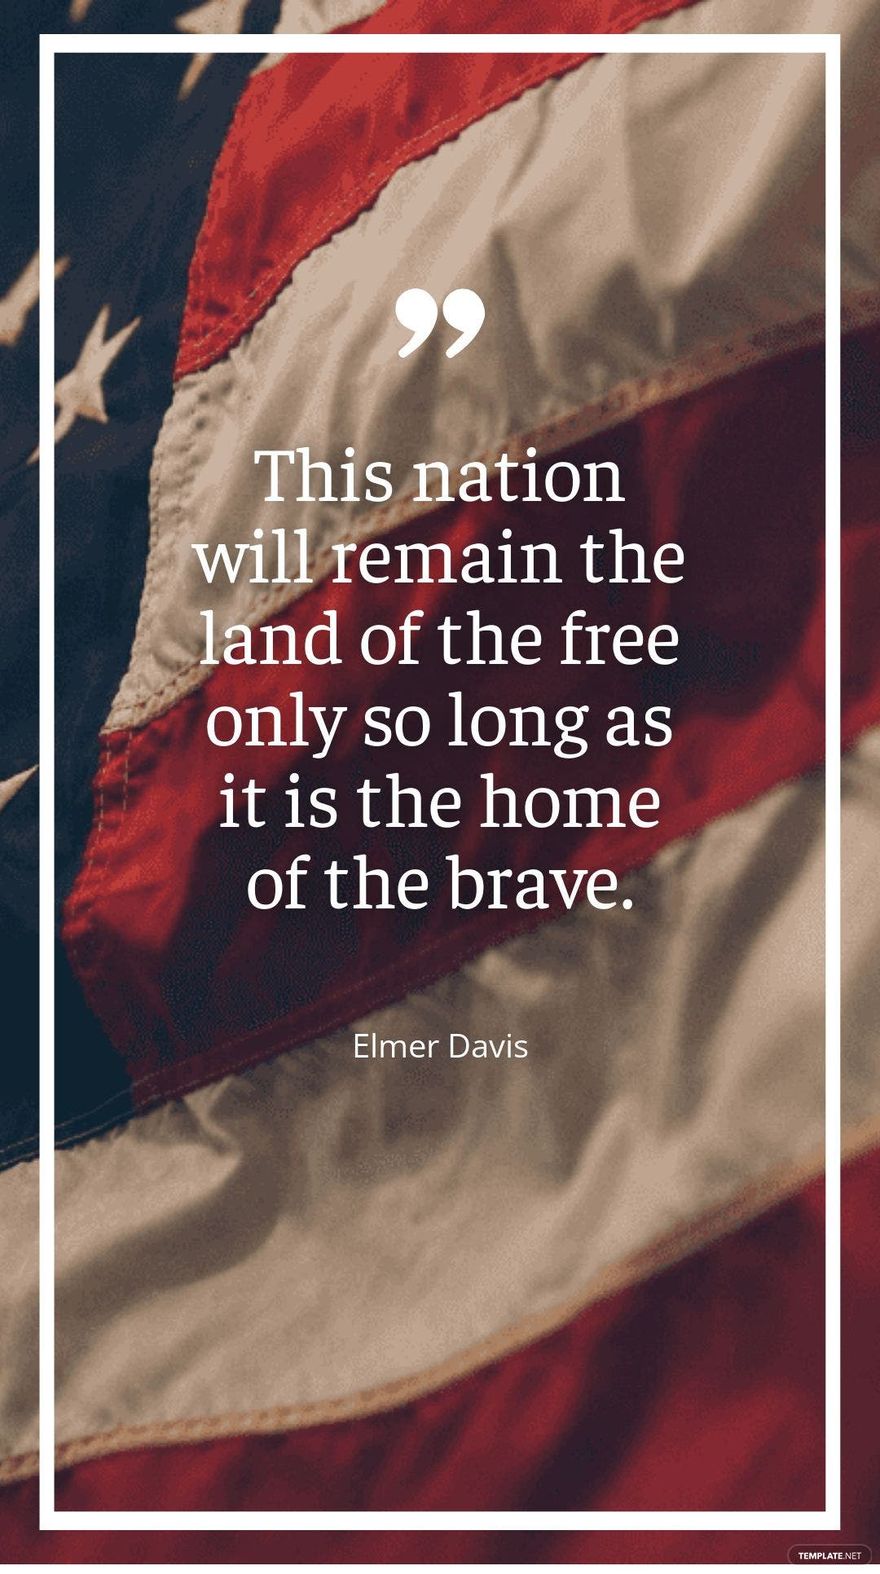 Elmer Davis - “This nation will remain the land of the only so long as it is the home of the brave.”